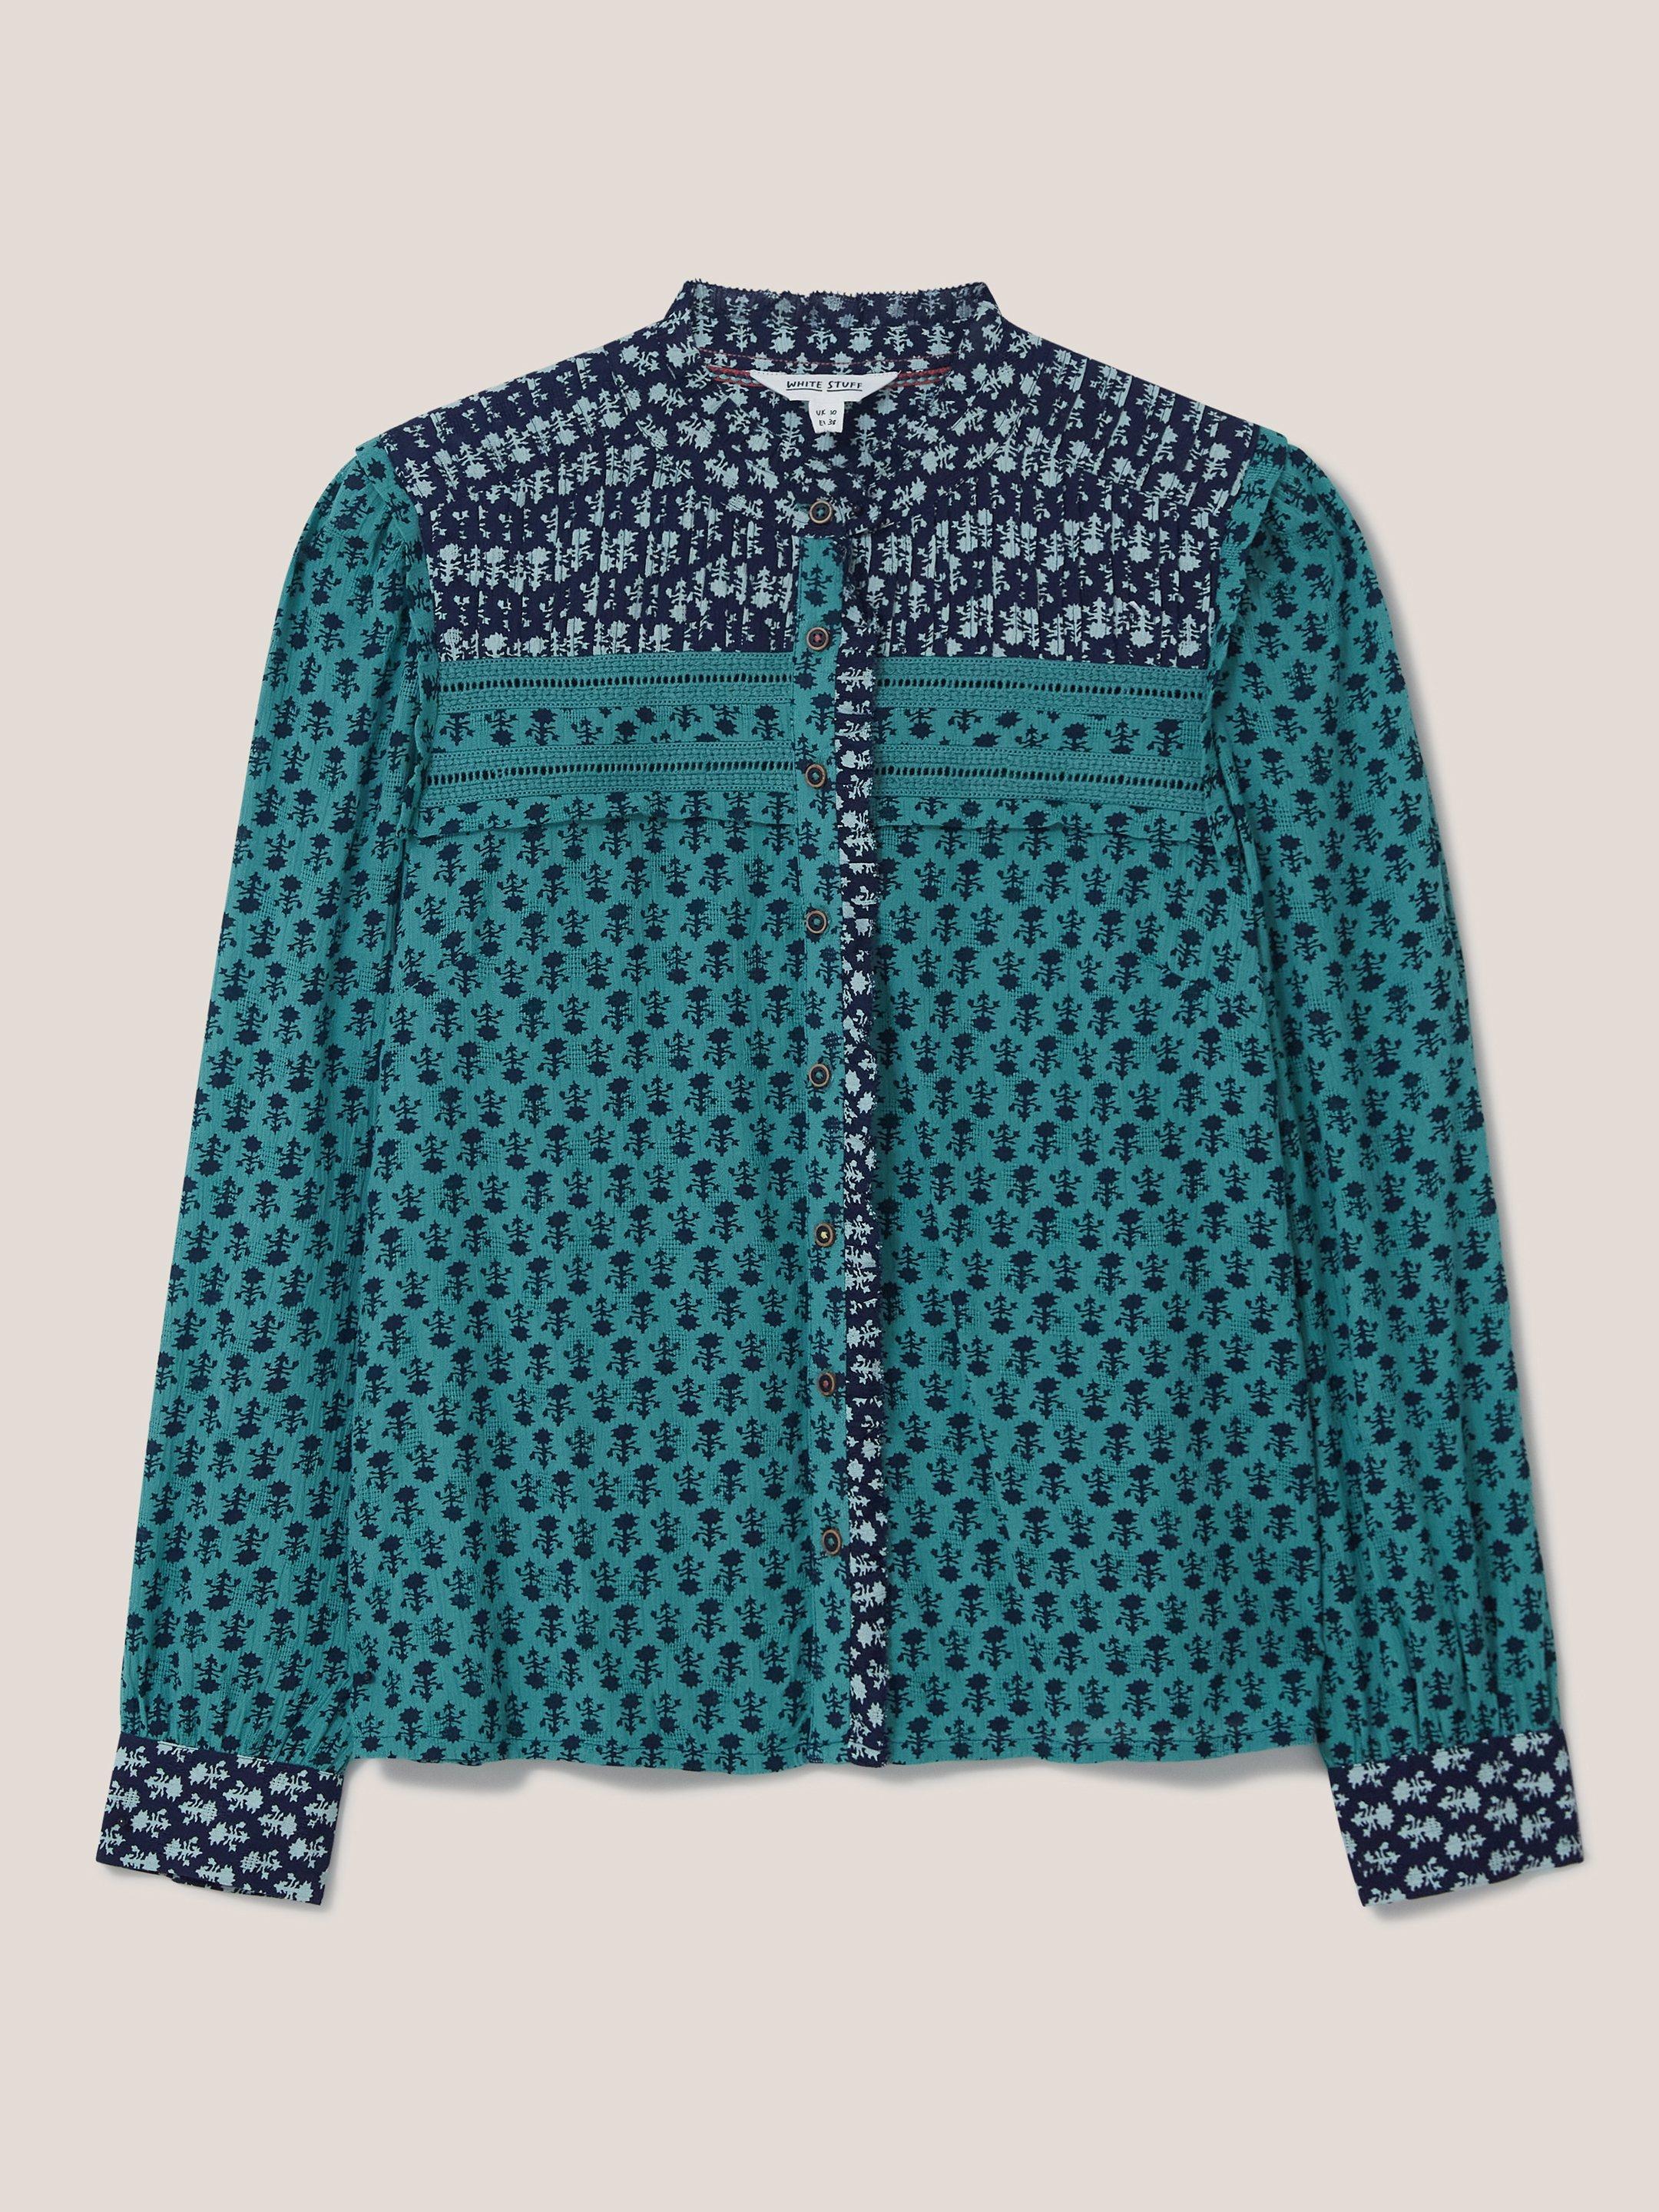 Mabel Mixed Print Shirt in TEAL MLT - FLAT FRONT